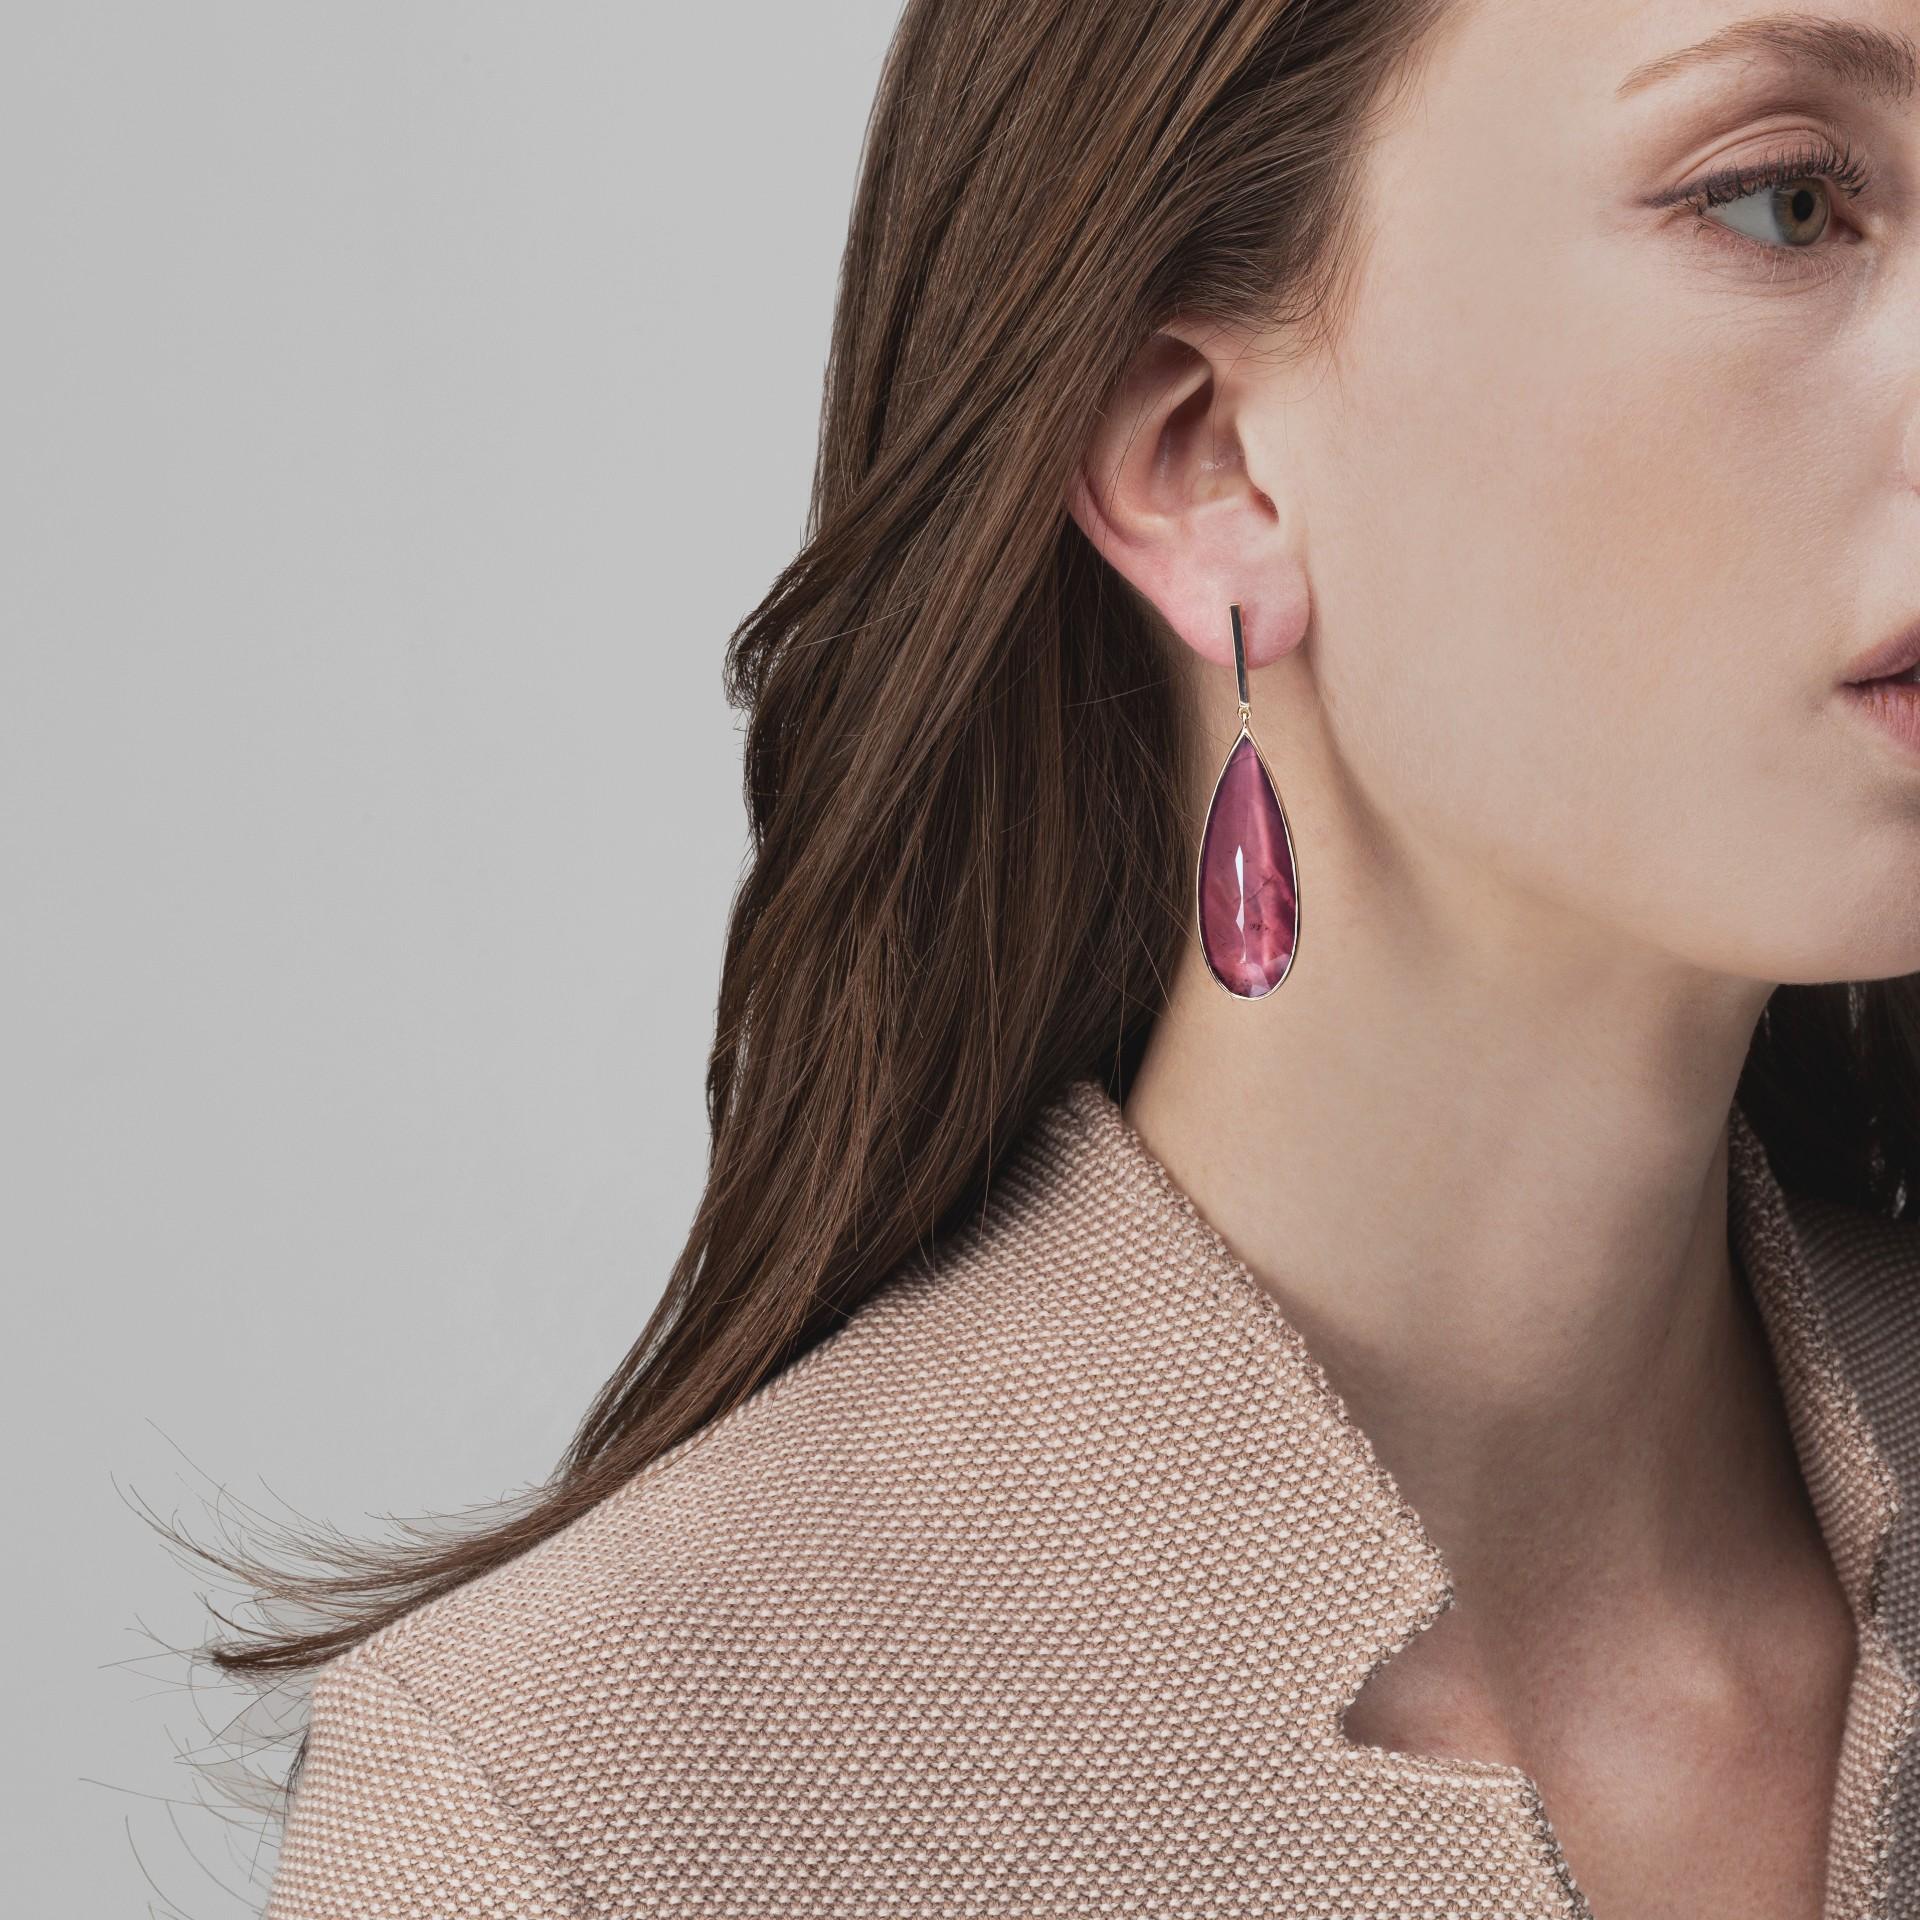 Alex Jona design collection, hand crafted in Italy, 18 Karat rose gold drop earrings set with a crazy cut Quartz with Rhodolite over mother of pearl. Dimensions : H 1.96 in x W 0.50 in 
Alex Jona jewels stand out, not only for their special design